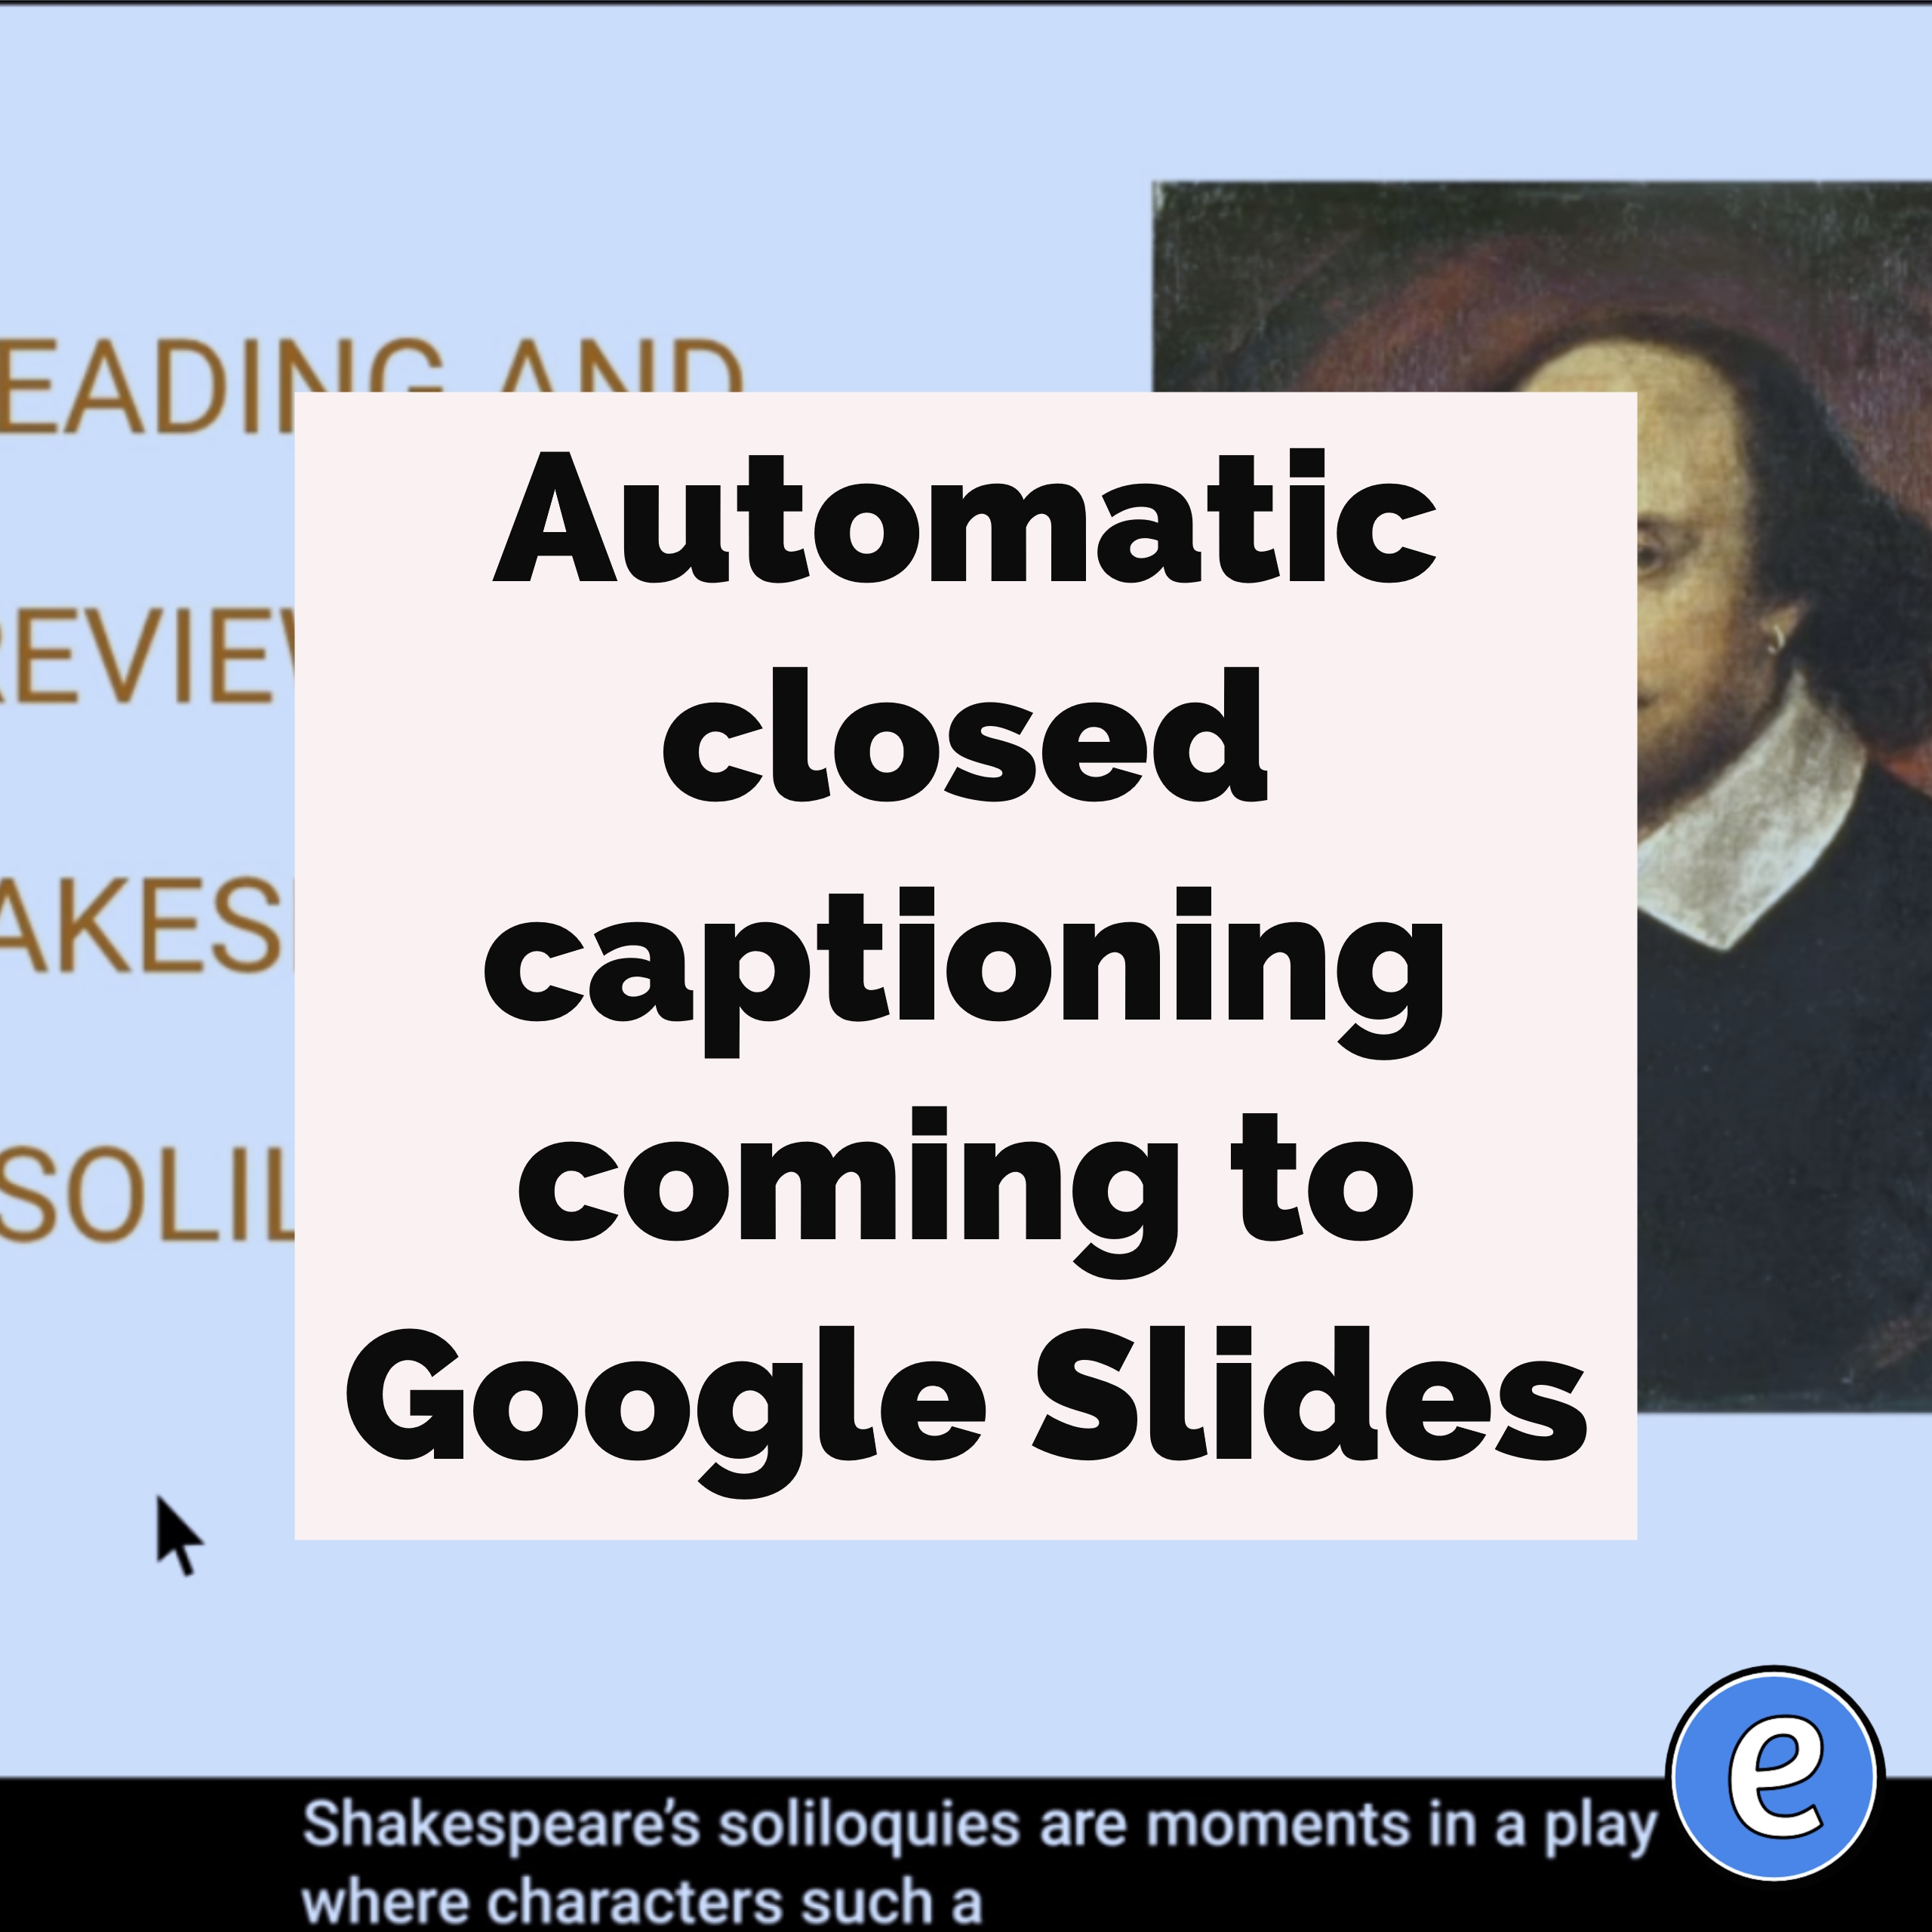 Automatic closed captioning coming to Google Slides